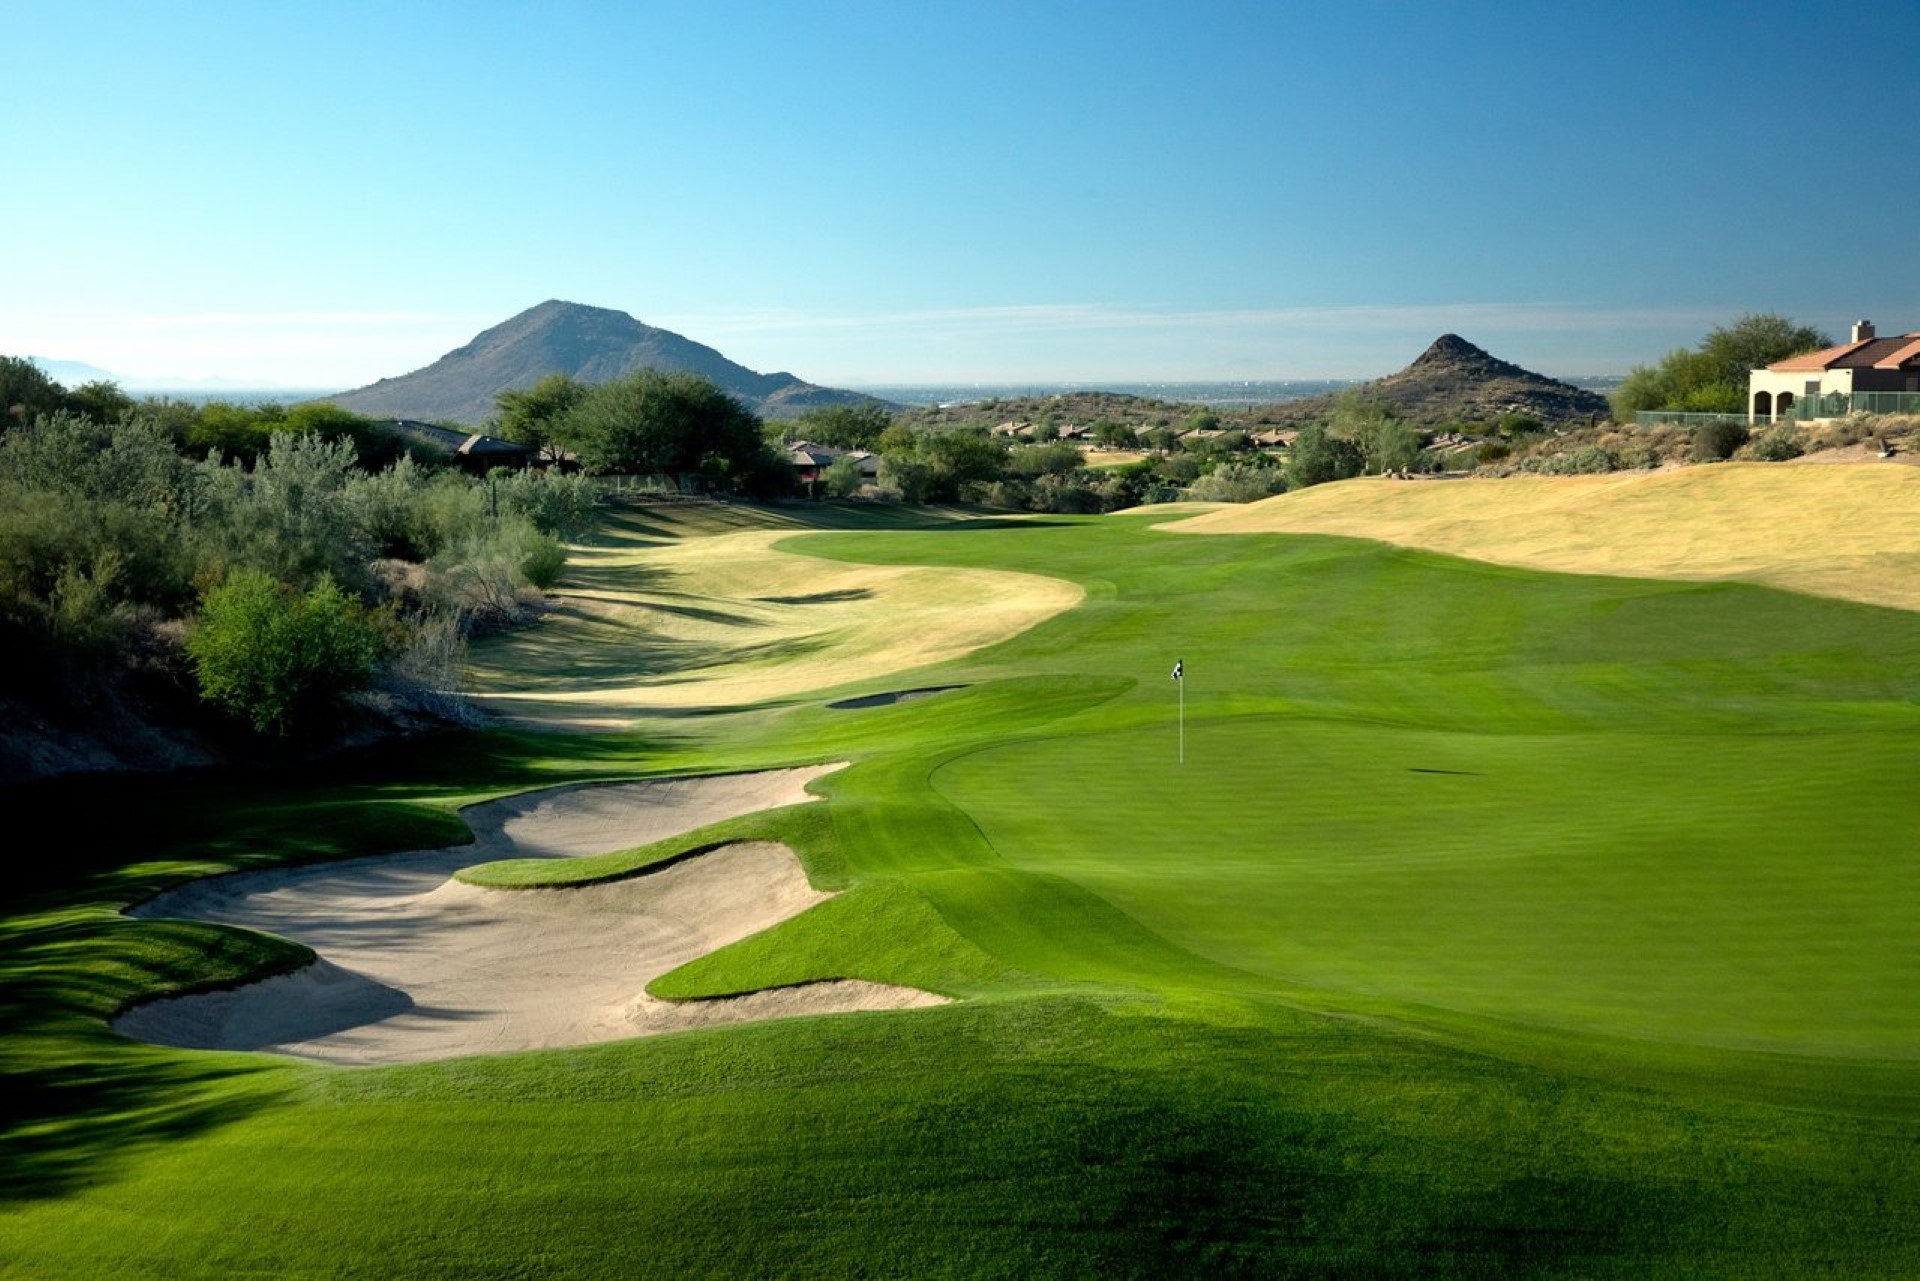 Scottsdale Eagle Mountain Golf Club. Photo Credit: Chip Henderson Photography